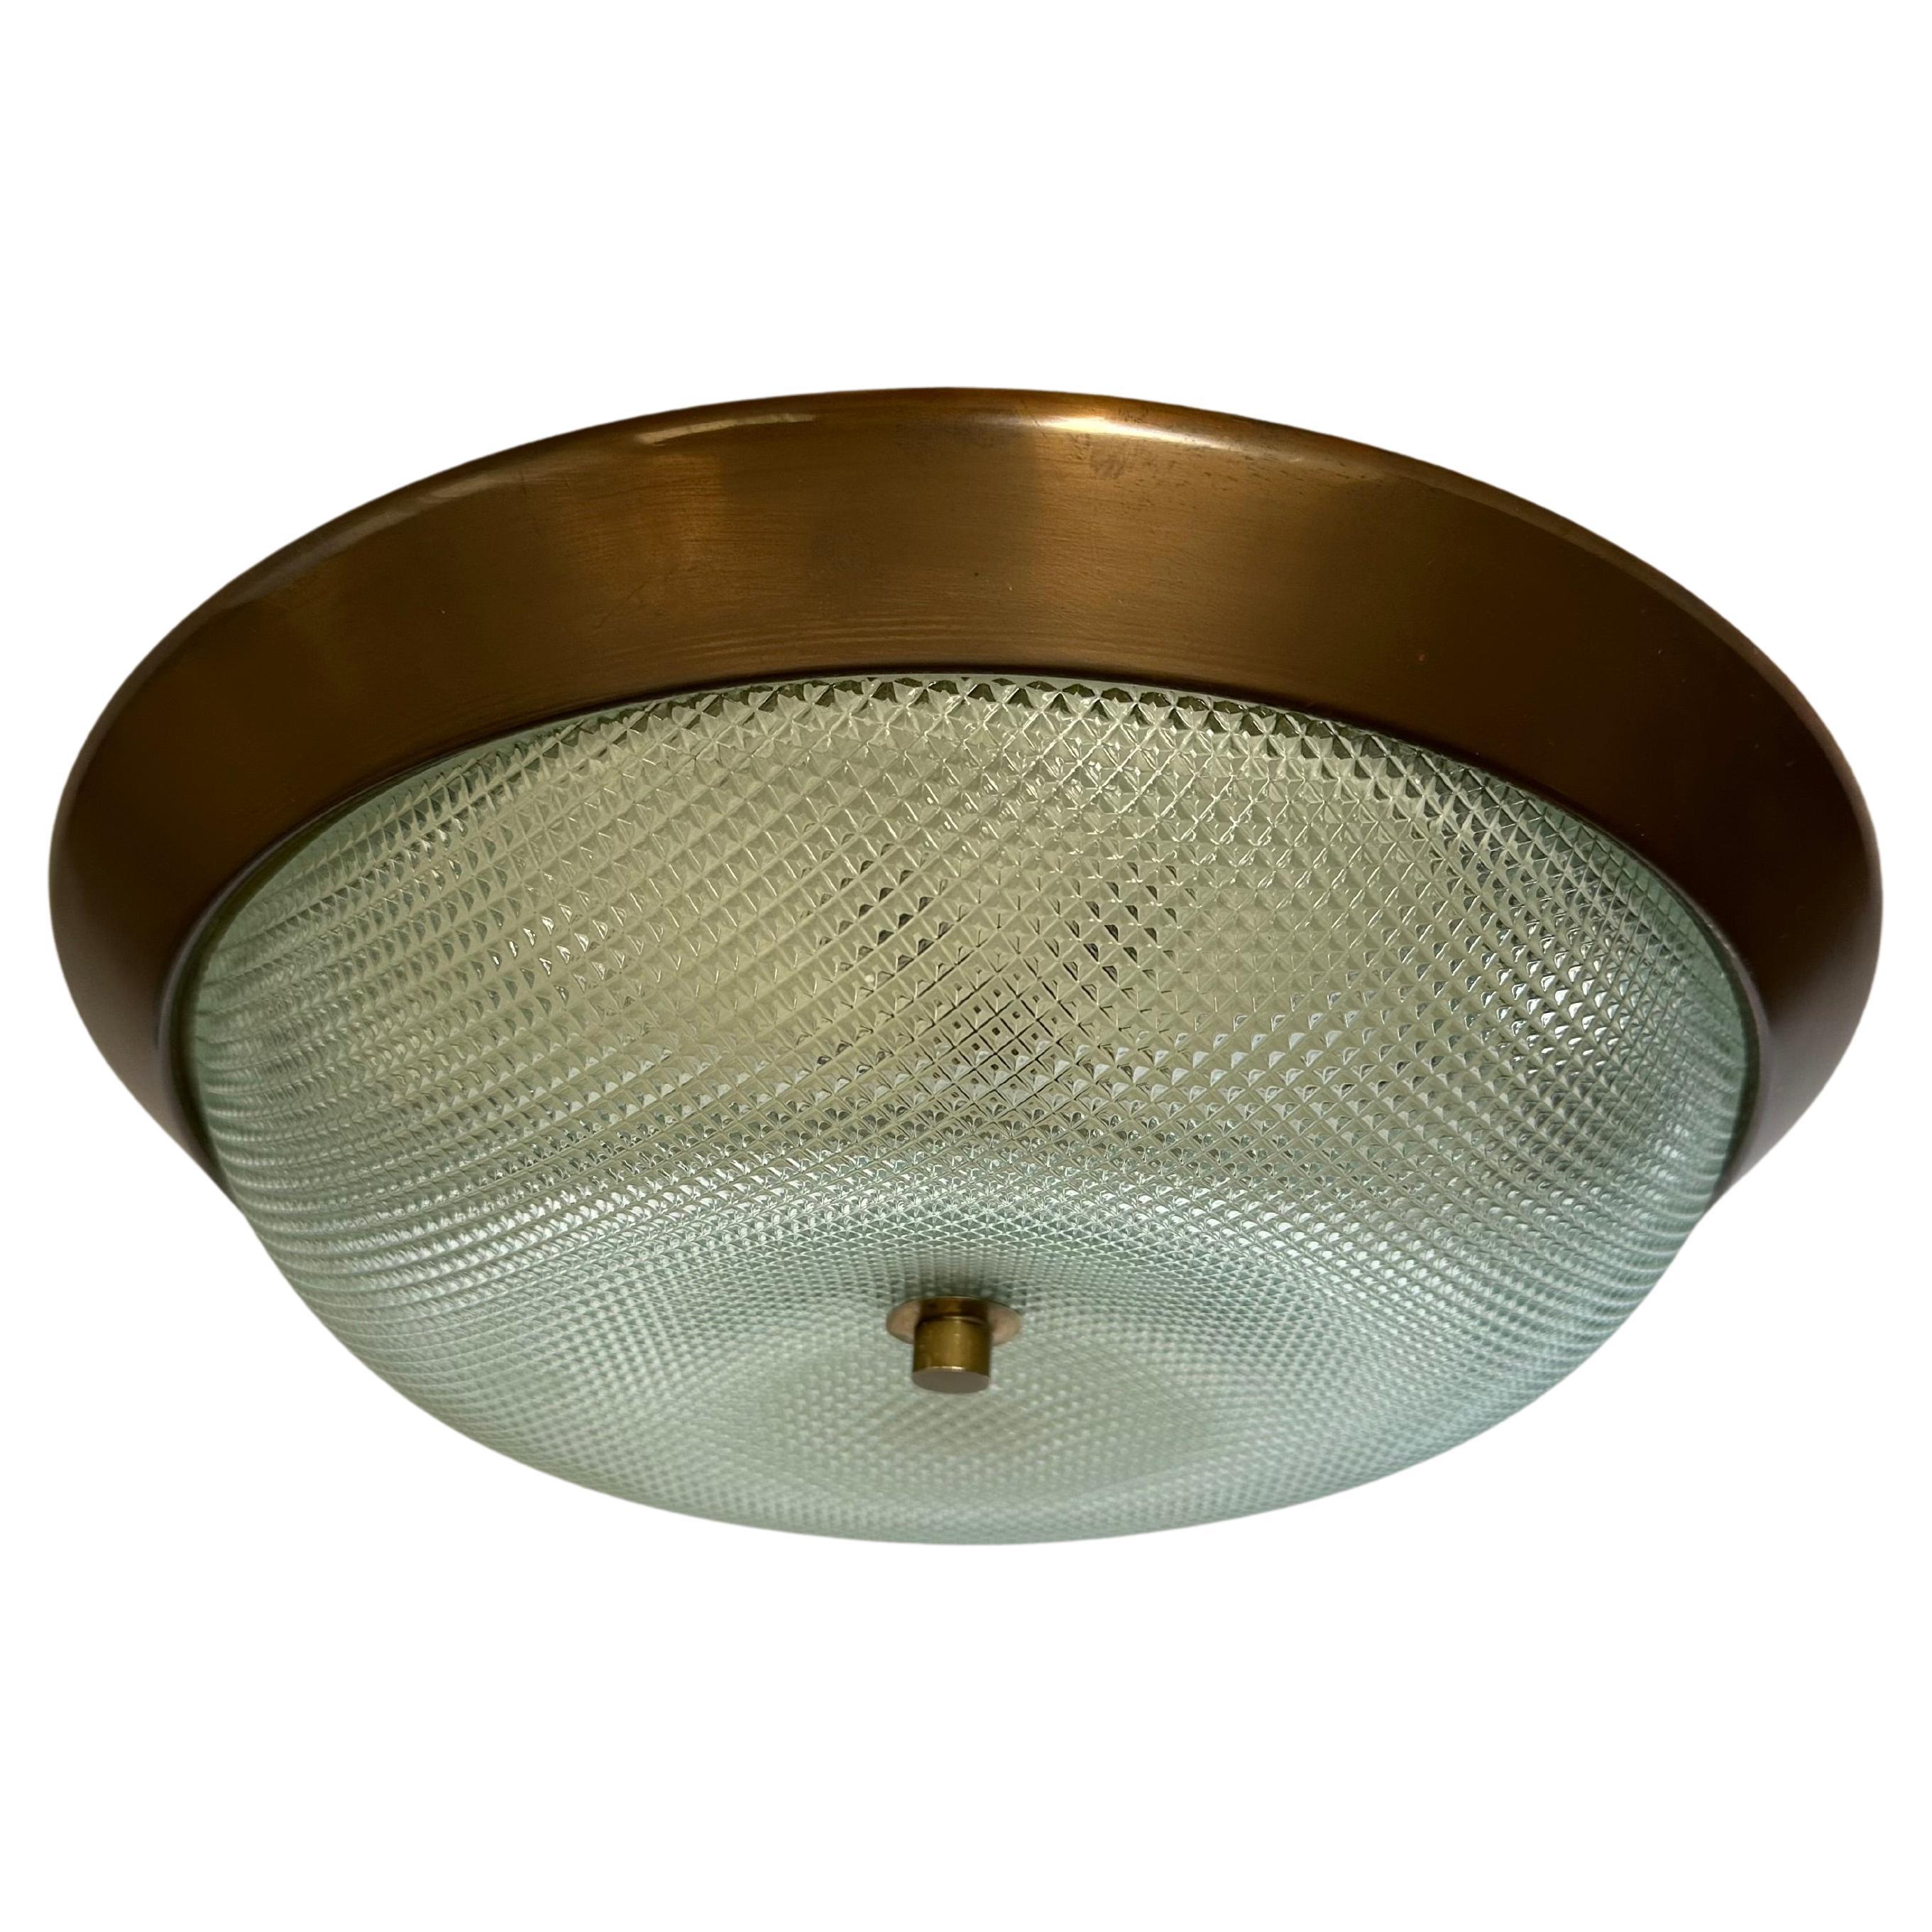 Flush mount ceiling lights.
Designed and made in Italy in 1960s
Textured glass, patinated brass.
Takes 3 candelabra bulbs each.
Complimentary US rewiring upon request.
Three flush mounts are available.
Price is for one flush mount.

At Illustris